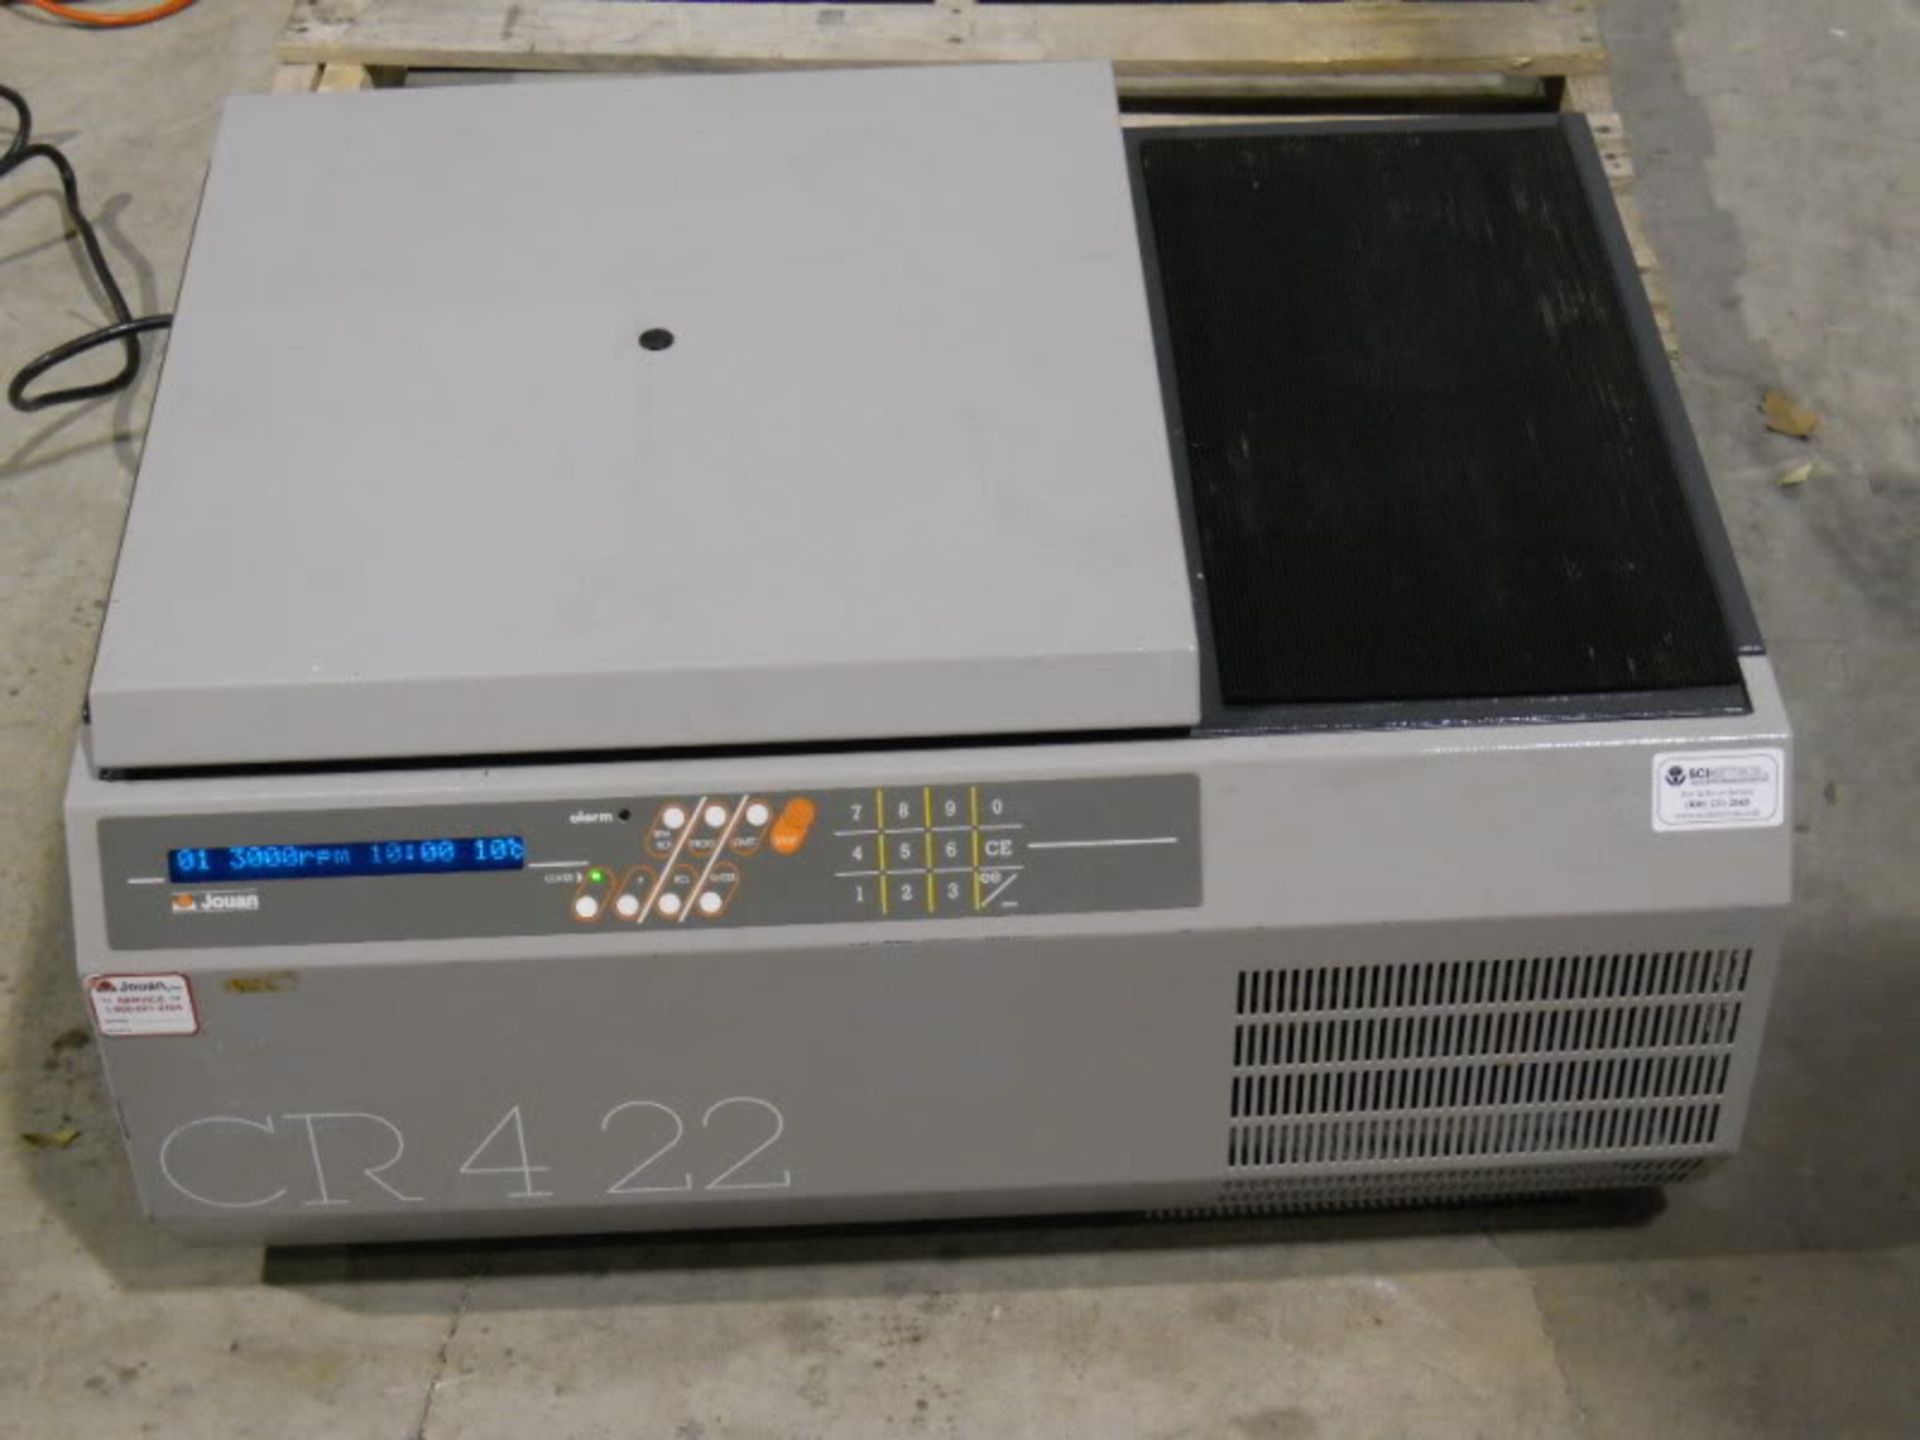 Jouan CR4-22 Centrifuge for Parts, Qty 1, 220932485952